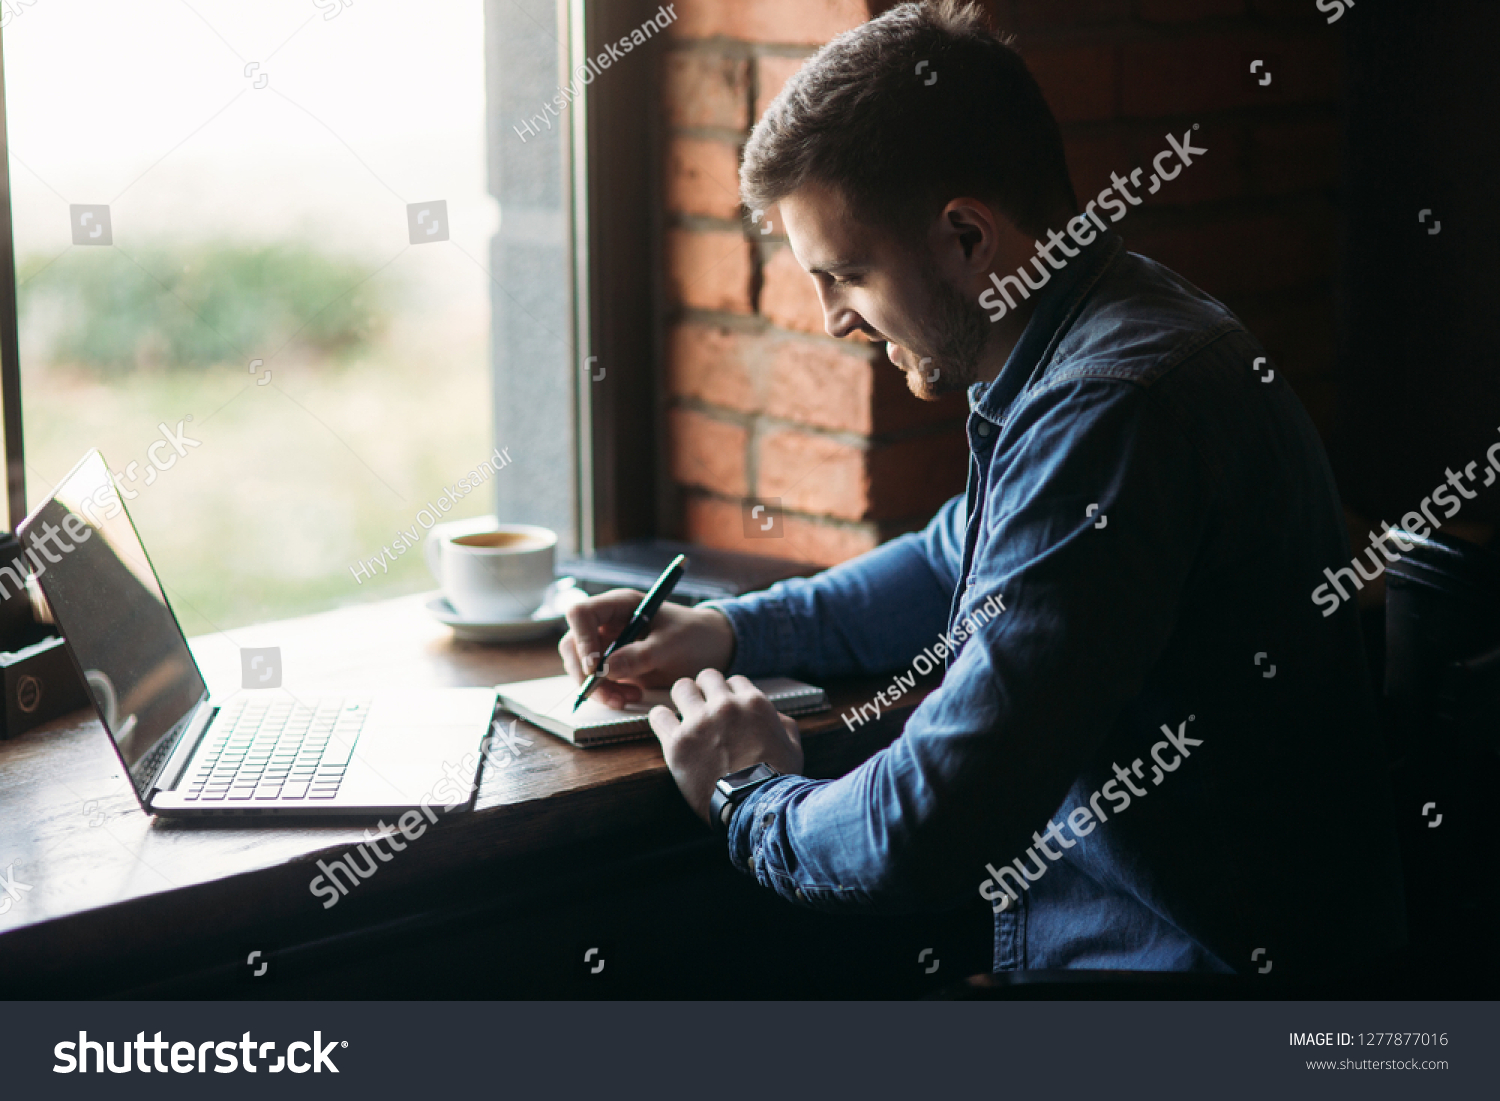 Man with a beard uses a laptop in a cafe and writes a note #1277877016